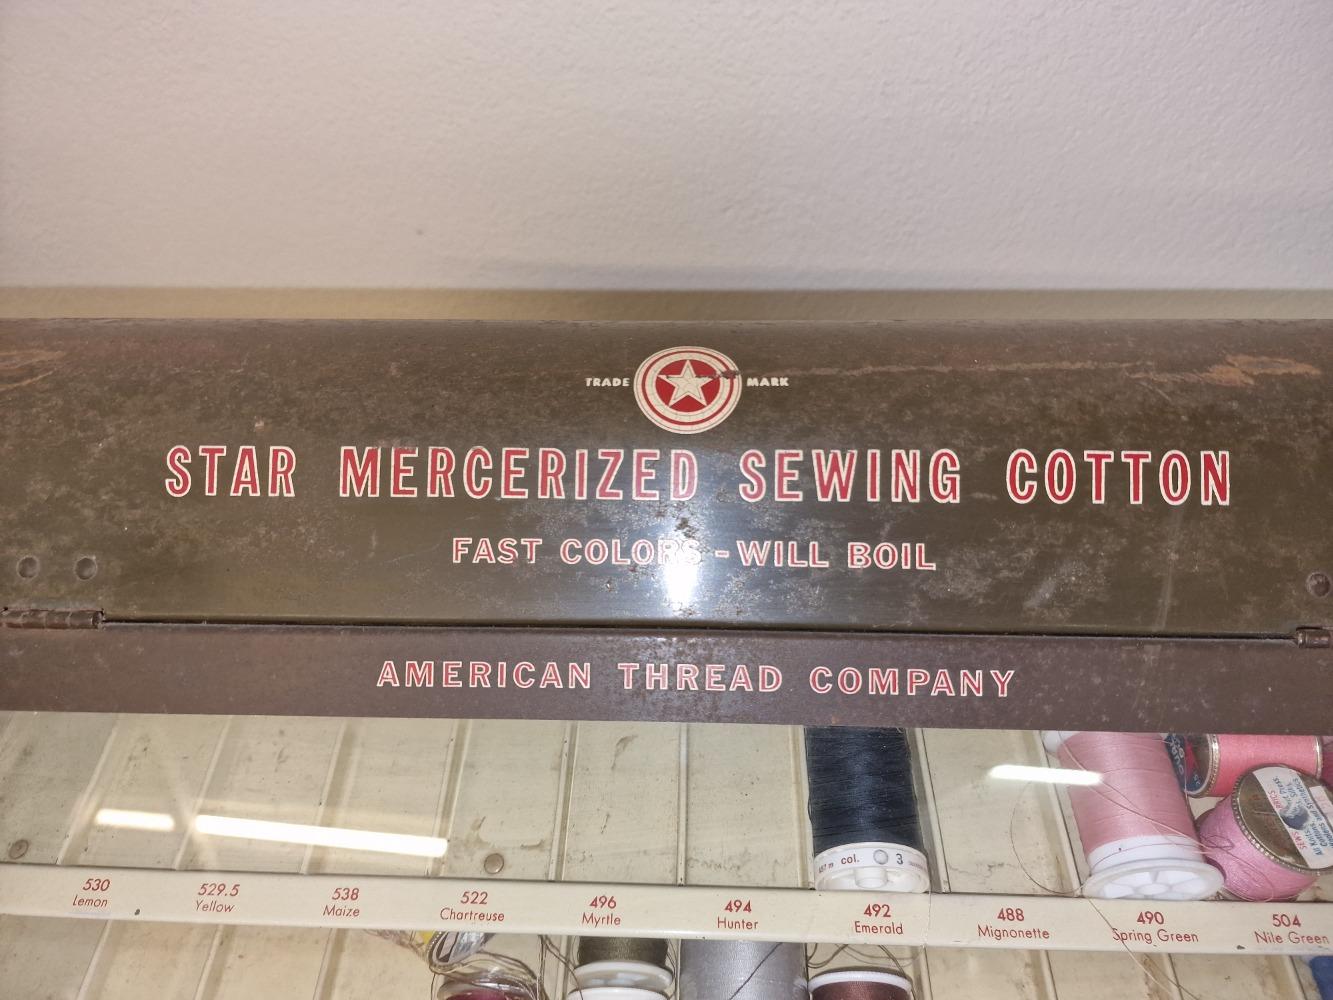 Star Mercerized sewing cotton